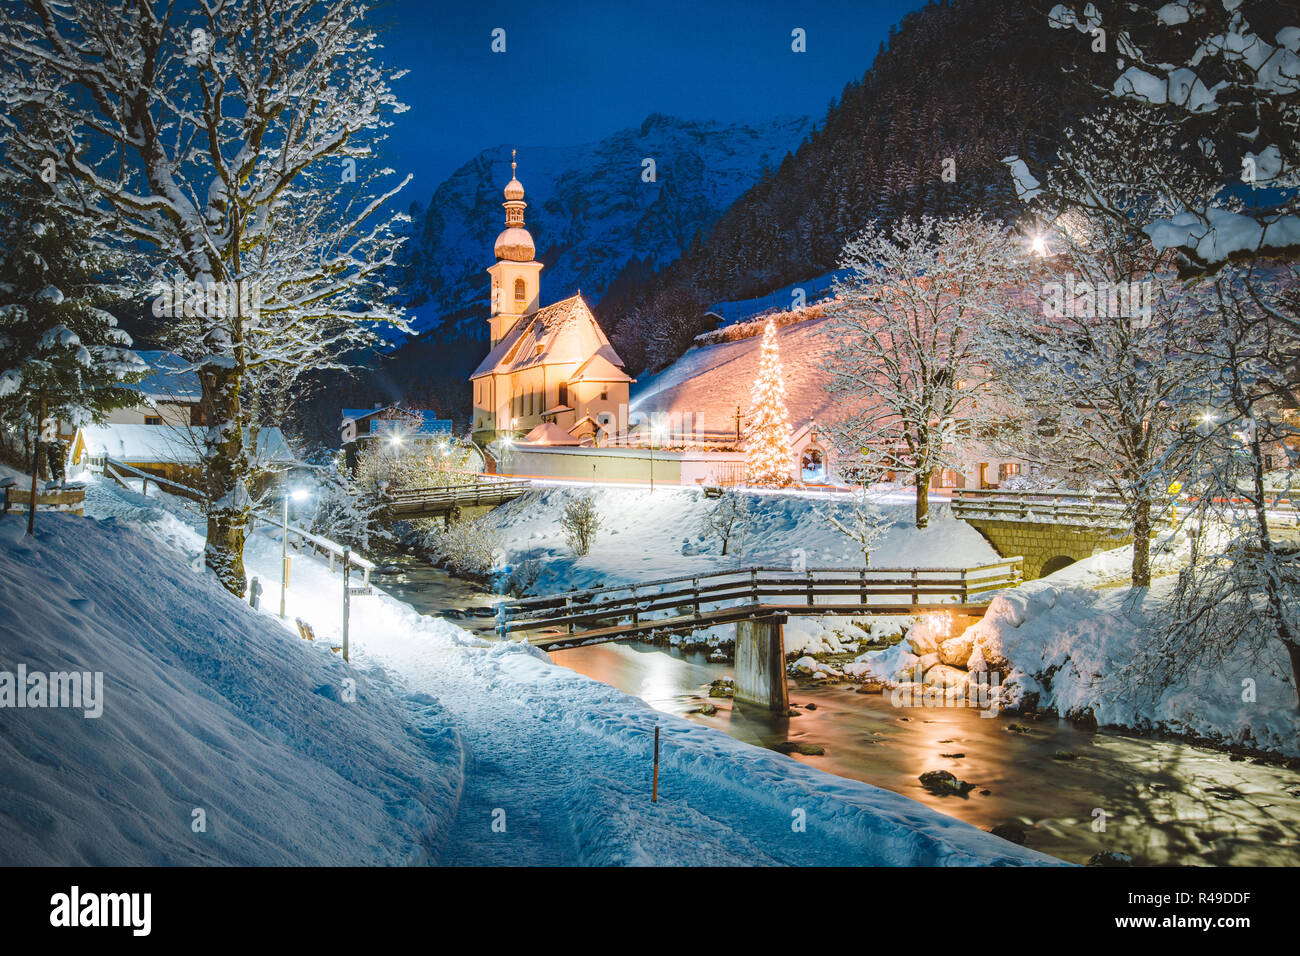 Twilight view of Sankt Sebastian pilgrimage church with decorated Christmas tree illuminated during blue hour at dusk in winter, Bavaria, Germany Stock Photo